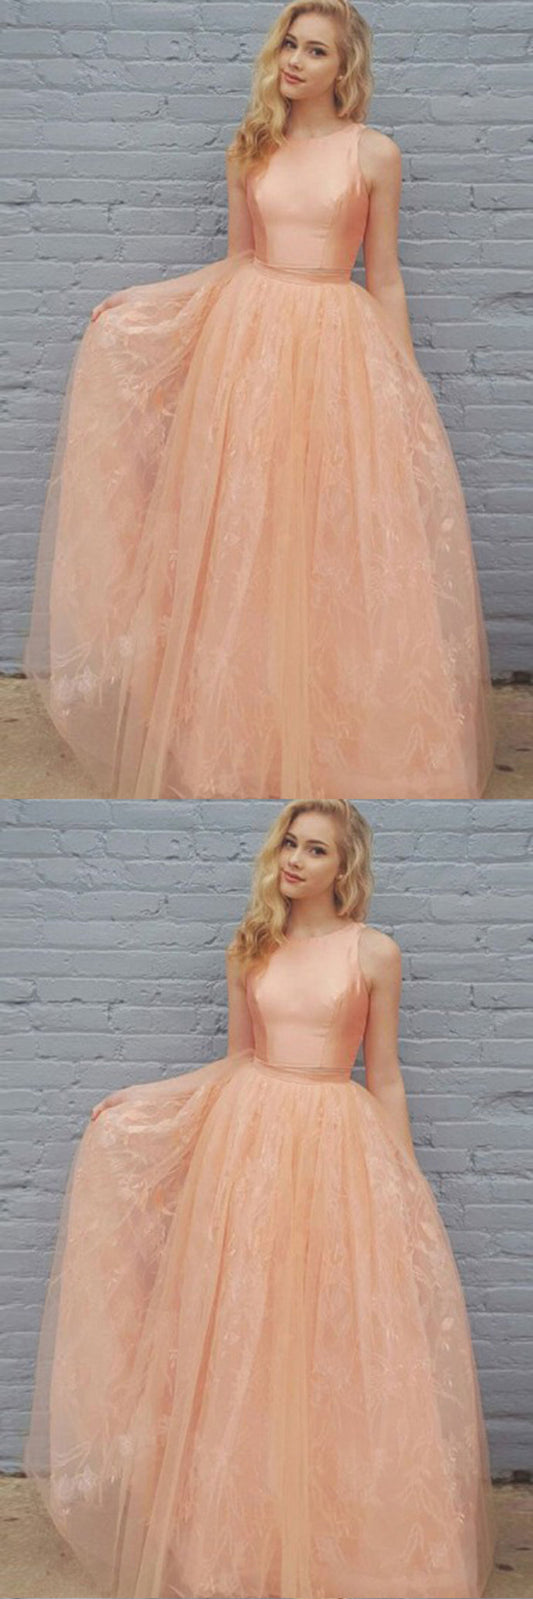 Two Piece Peach Tulle Lace Full Length Pageant Prom Dress, Homecoming Dress,3729